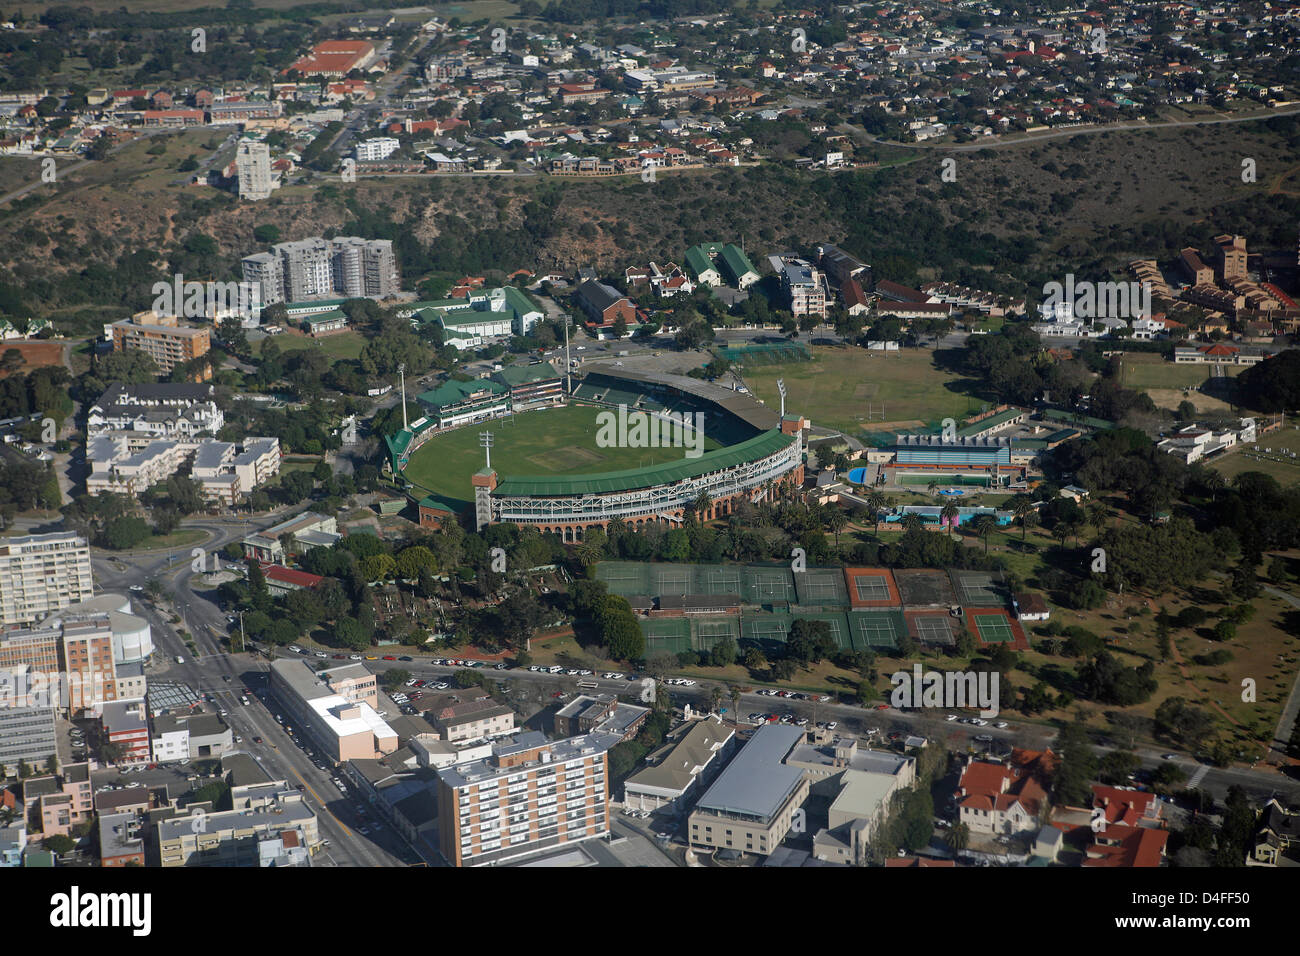 Aerial View of St George's Park Cricket Ground, Port Elizabeth, Eastern Cape,  Cape Province, South Africa Stock Photo - Alamy